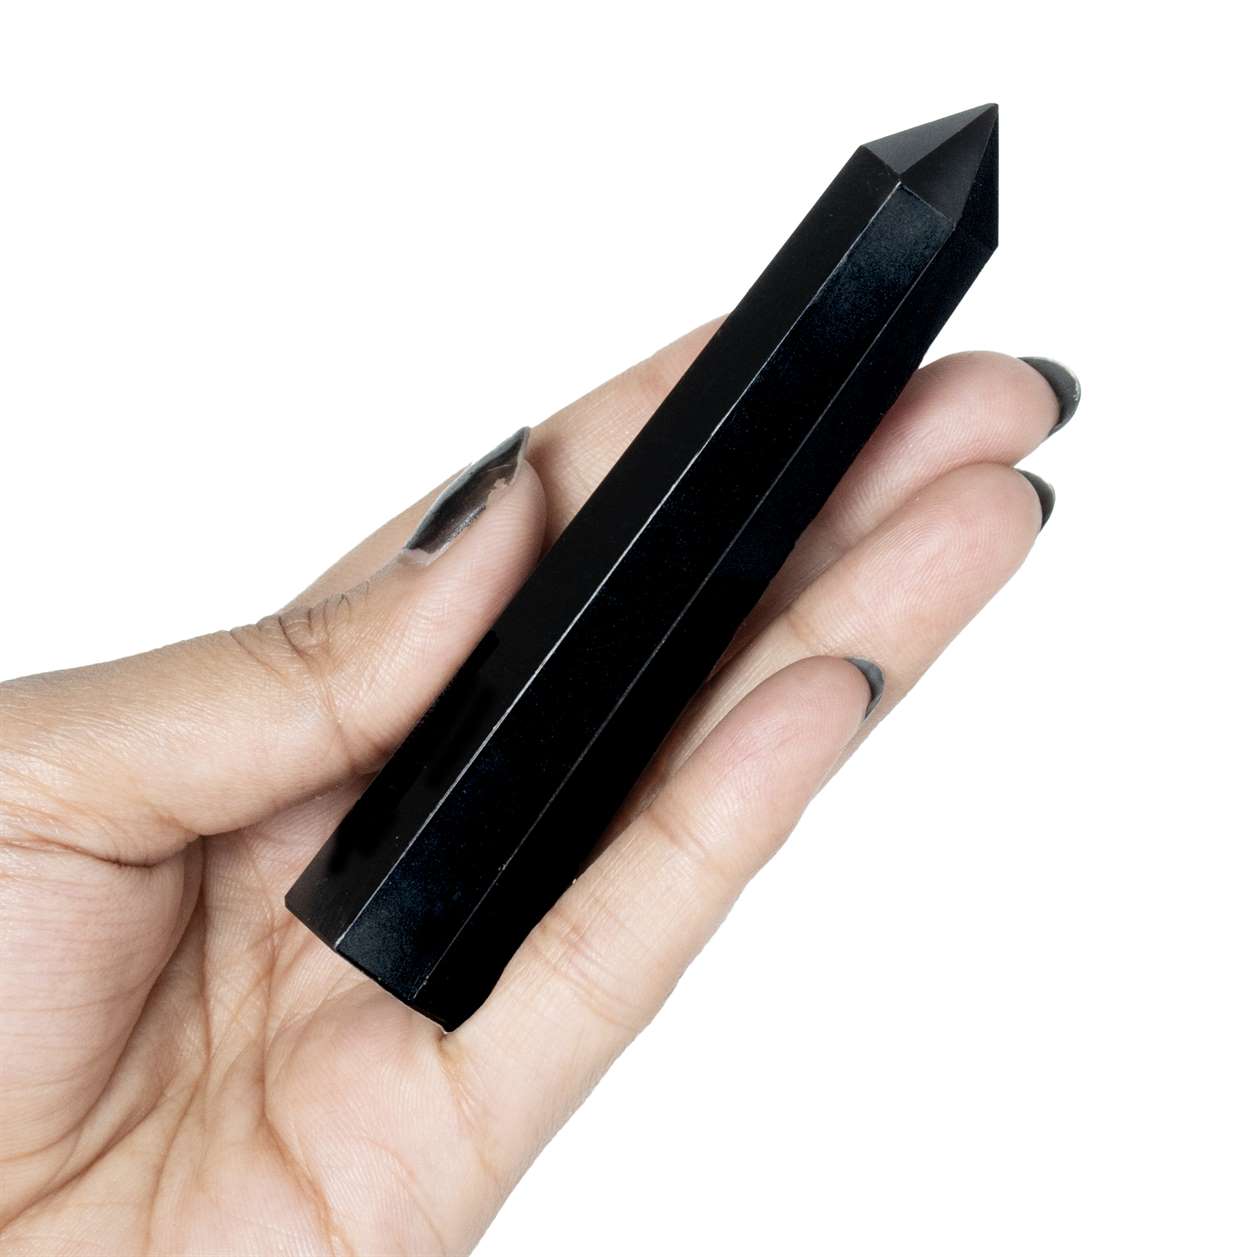 Black Tourmaline Healing Crystal Wand - For Manifestation, Massage, and Protection - TheIndianHand